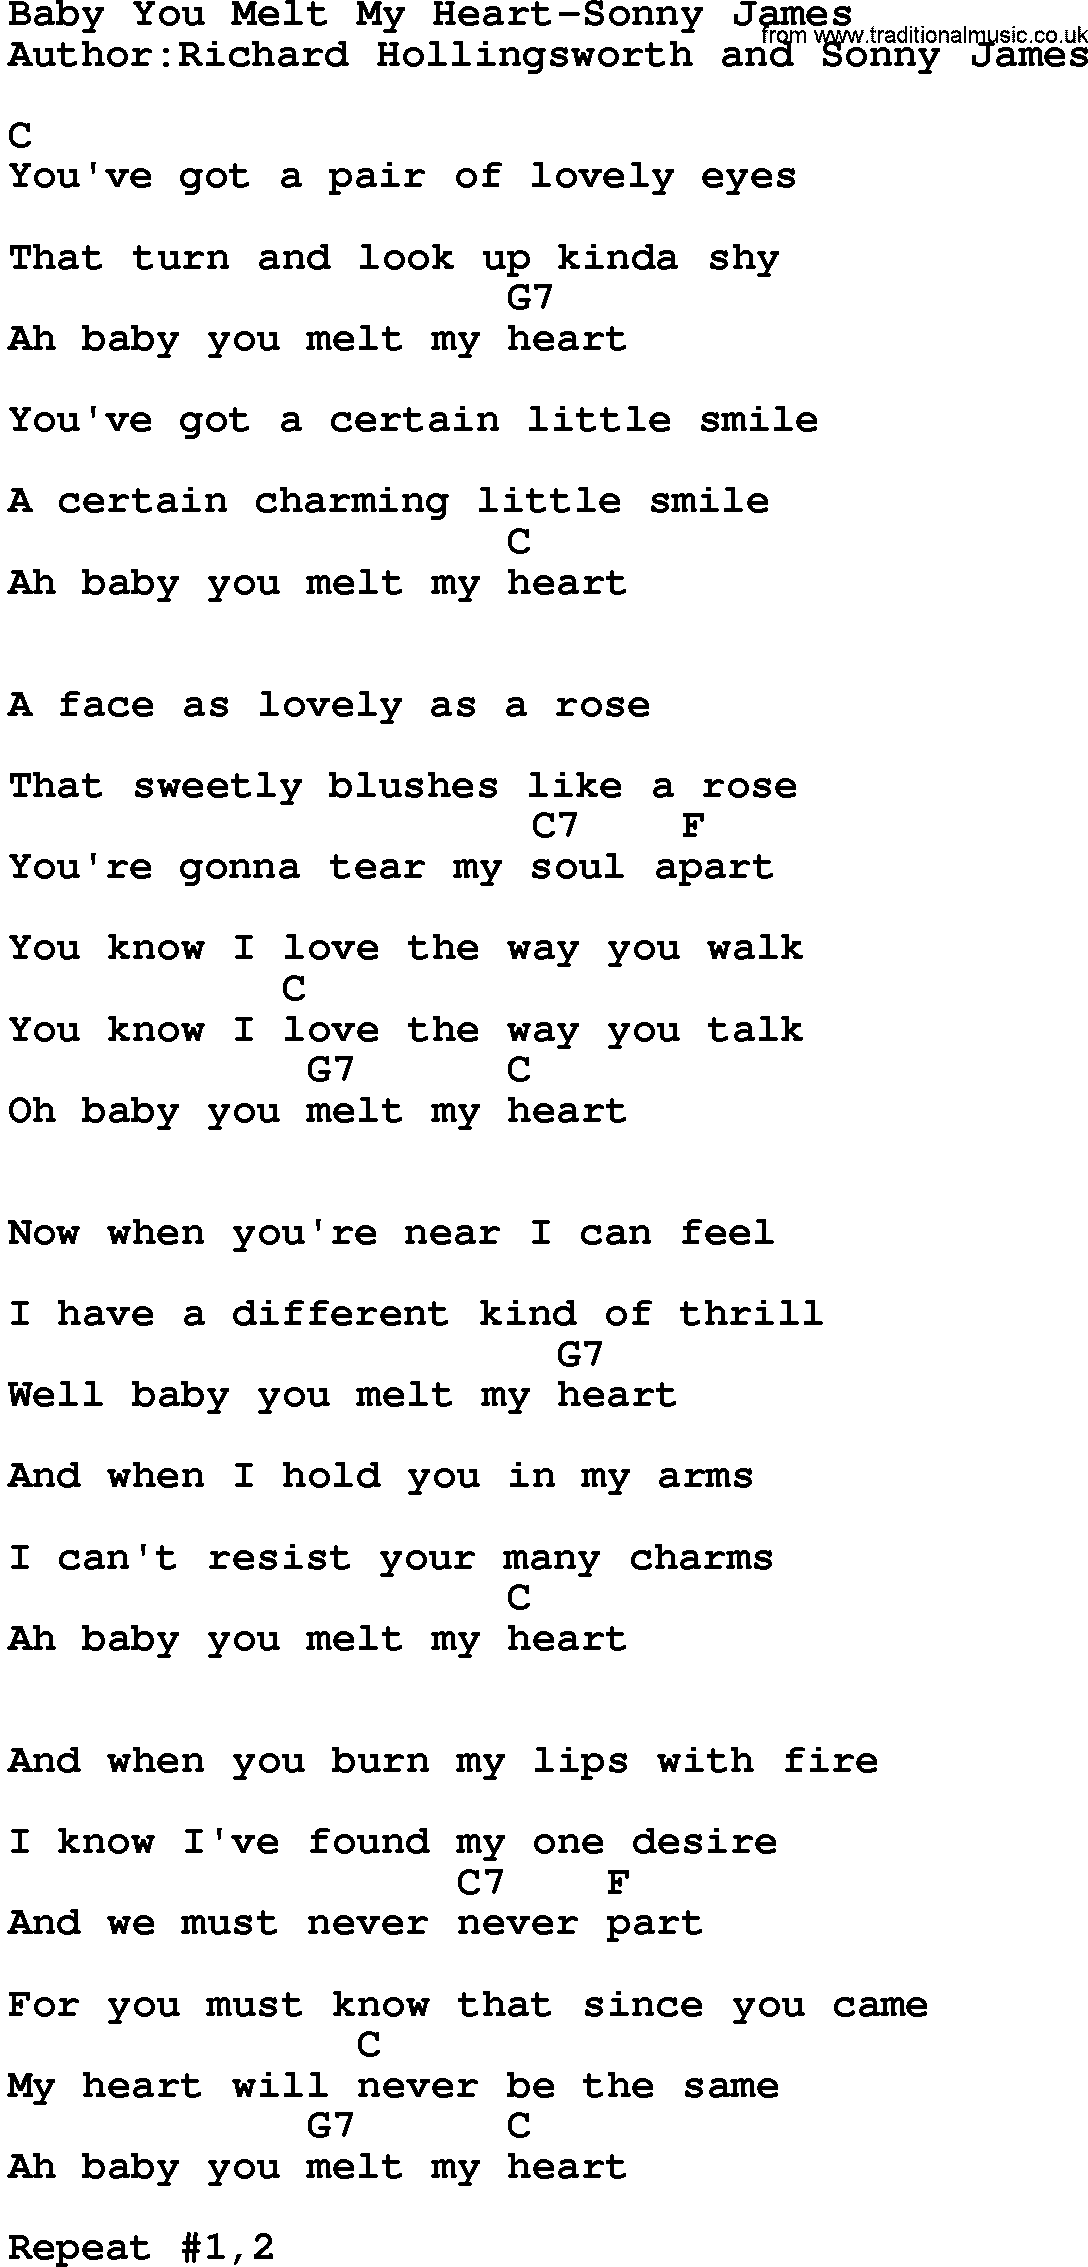 Country music song: Baby You Melt My Heart-Sonny James lyrics and chords